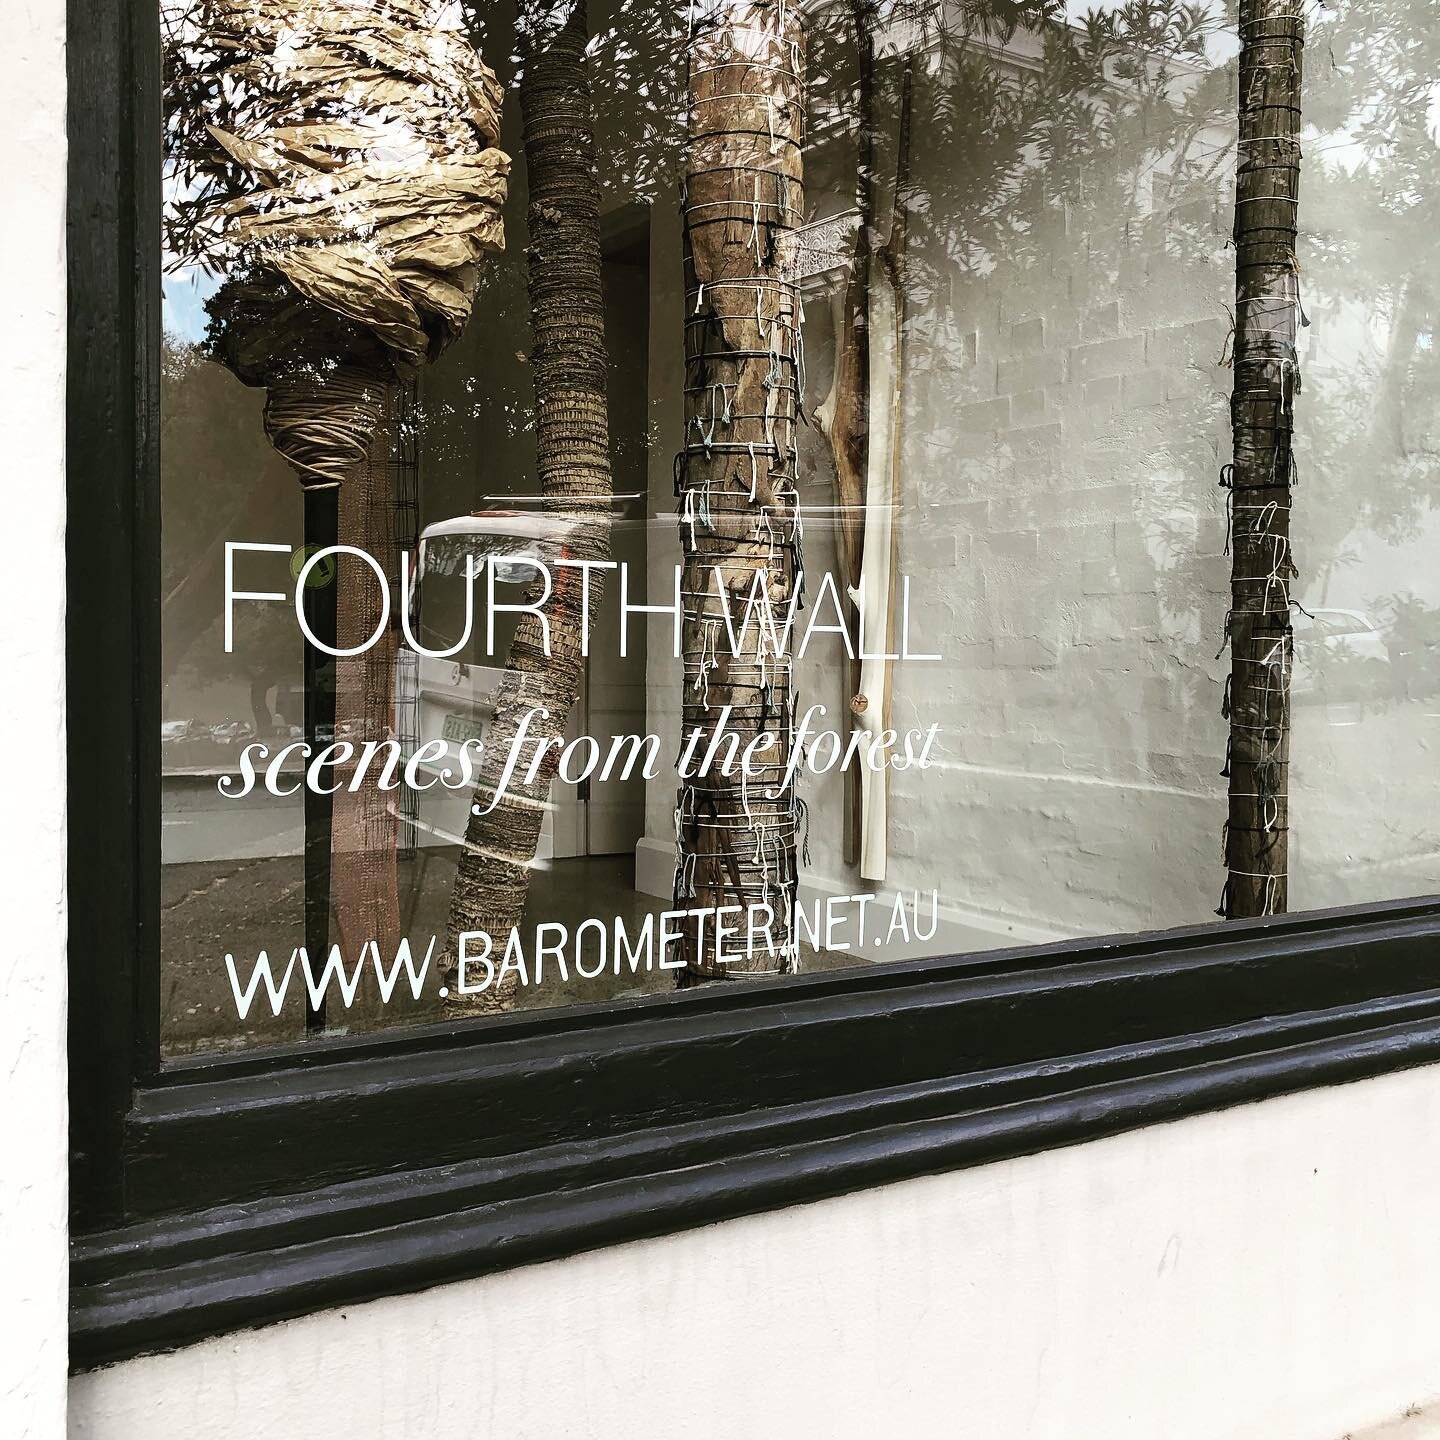 It&rsquo;s open 🎈  My solo exhibition FOURTH WALL / scenes from the forest now open at BAROMETER GALLERY in Paddington until May 9.  Open every day 11-6 except Monday. Please pop in if you get a free moment.  Opening launch today 4-6pm.  Enjoyed a s